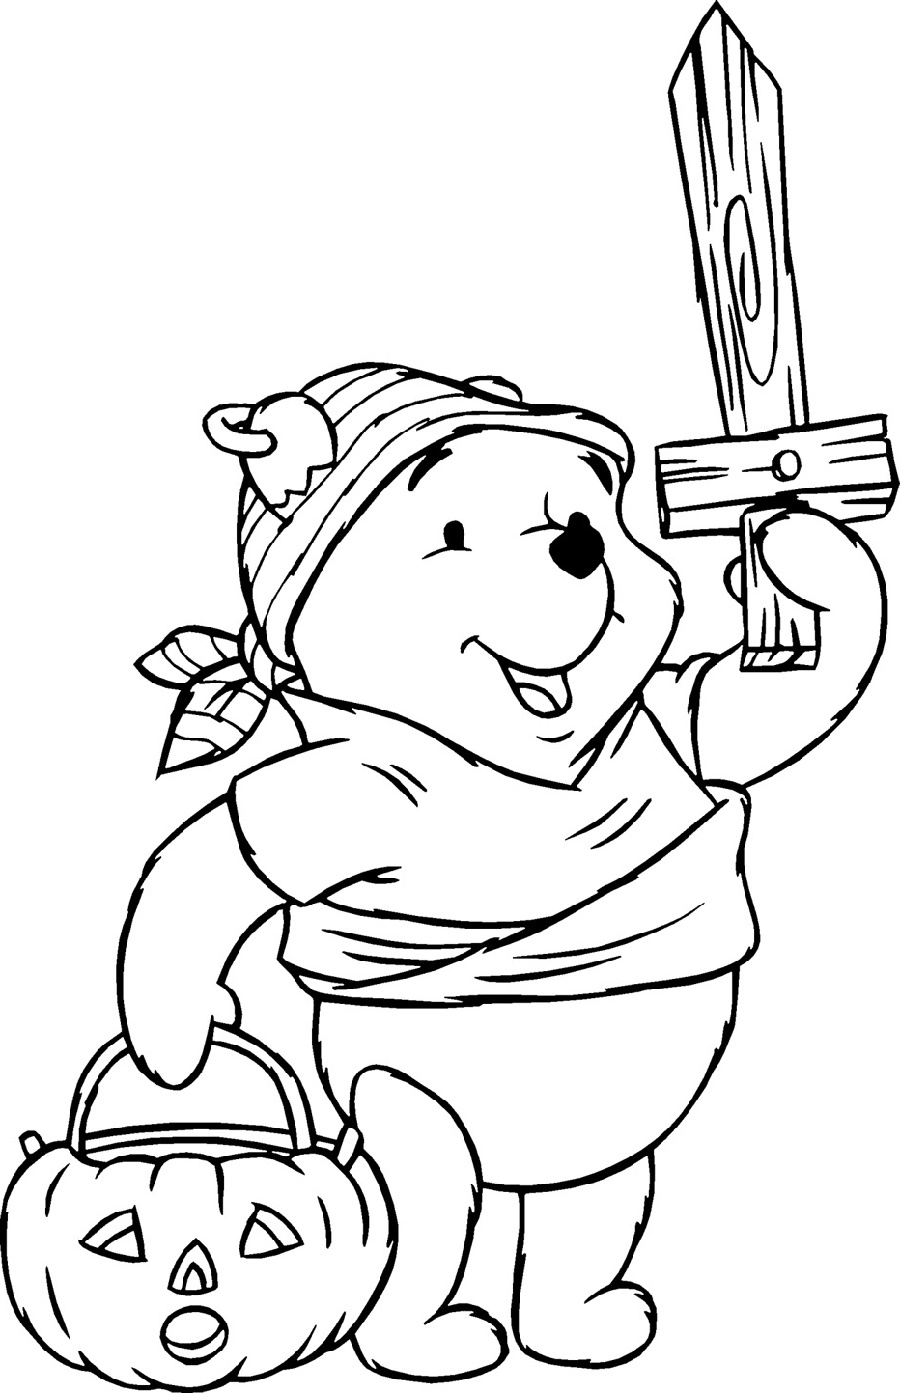 Halloween Coloring Pages Printable Winnie The Pooh